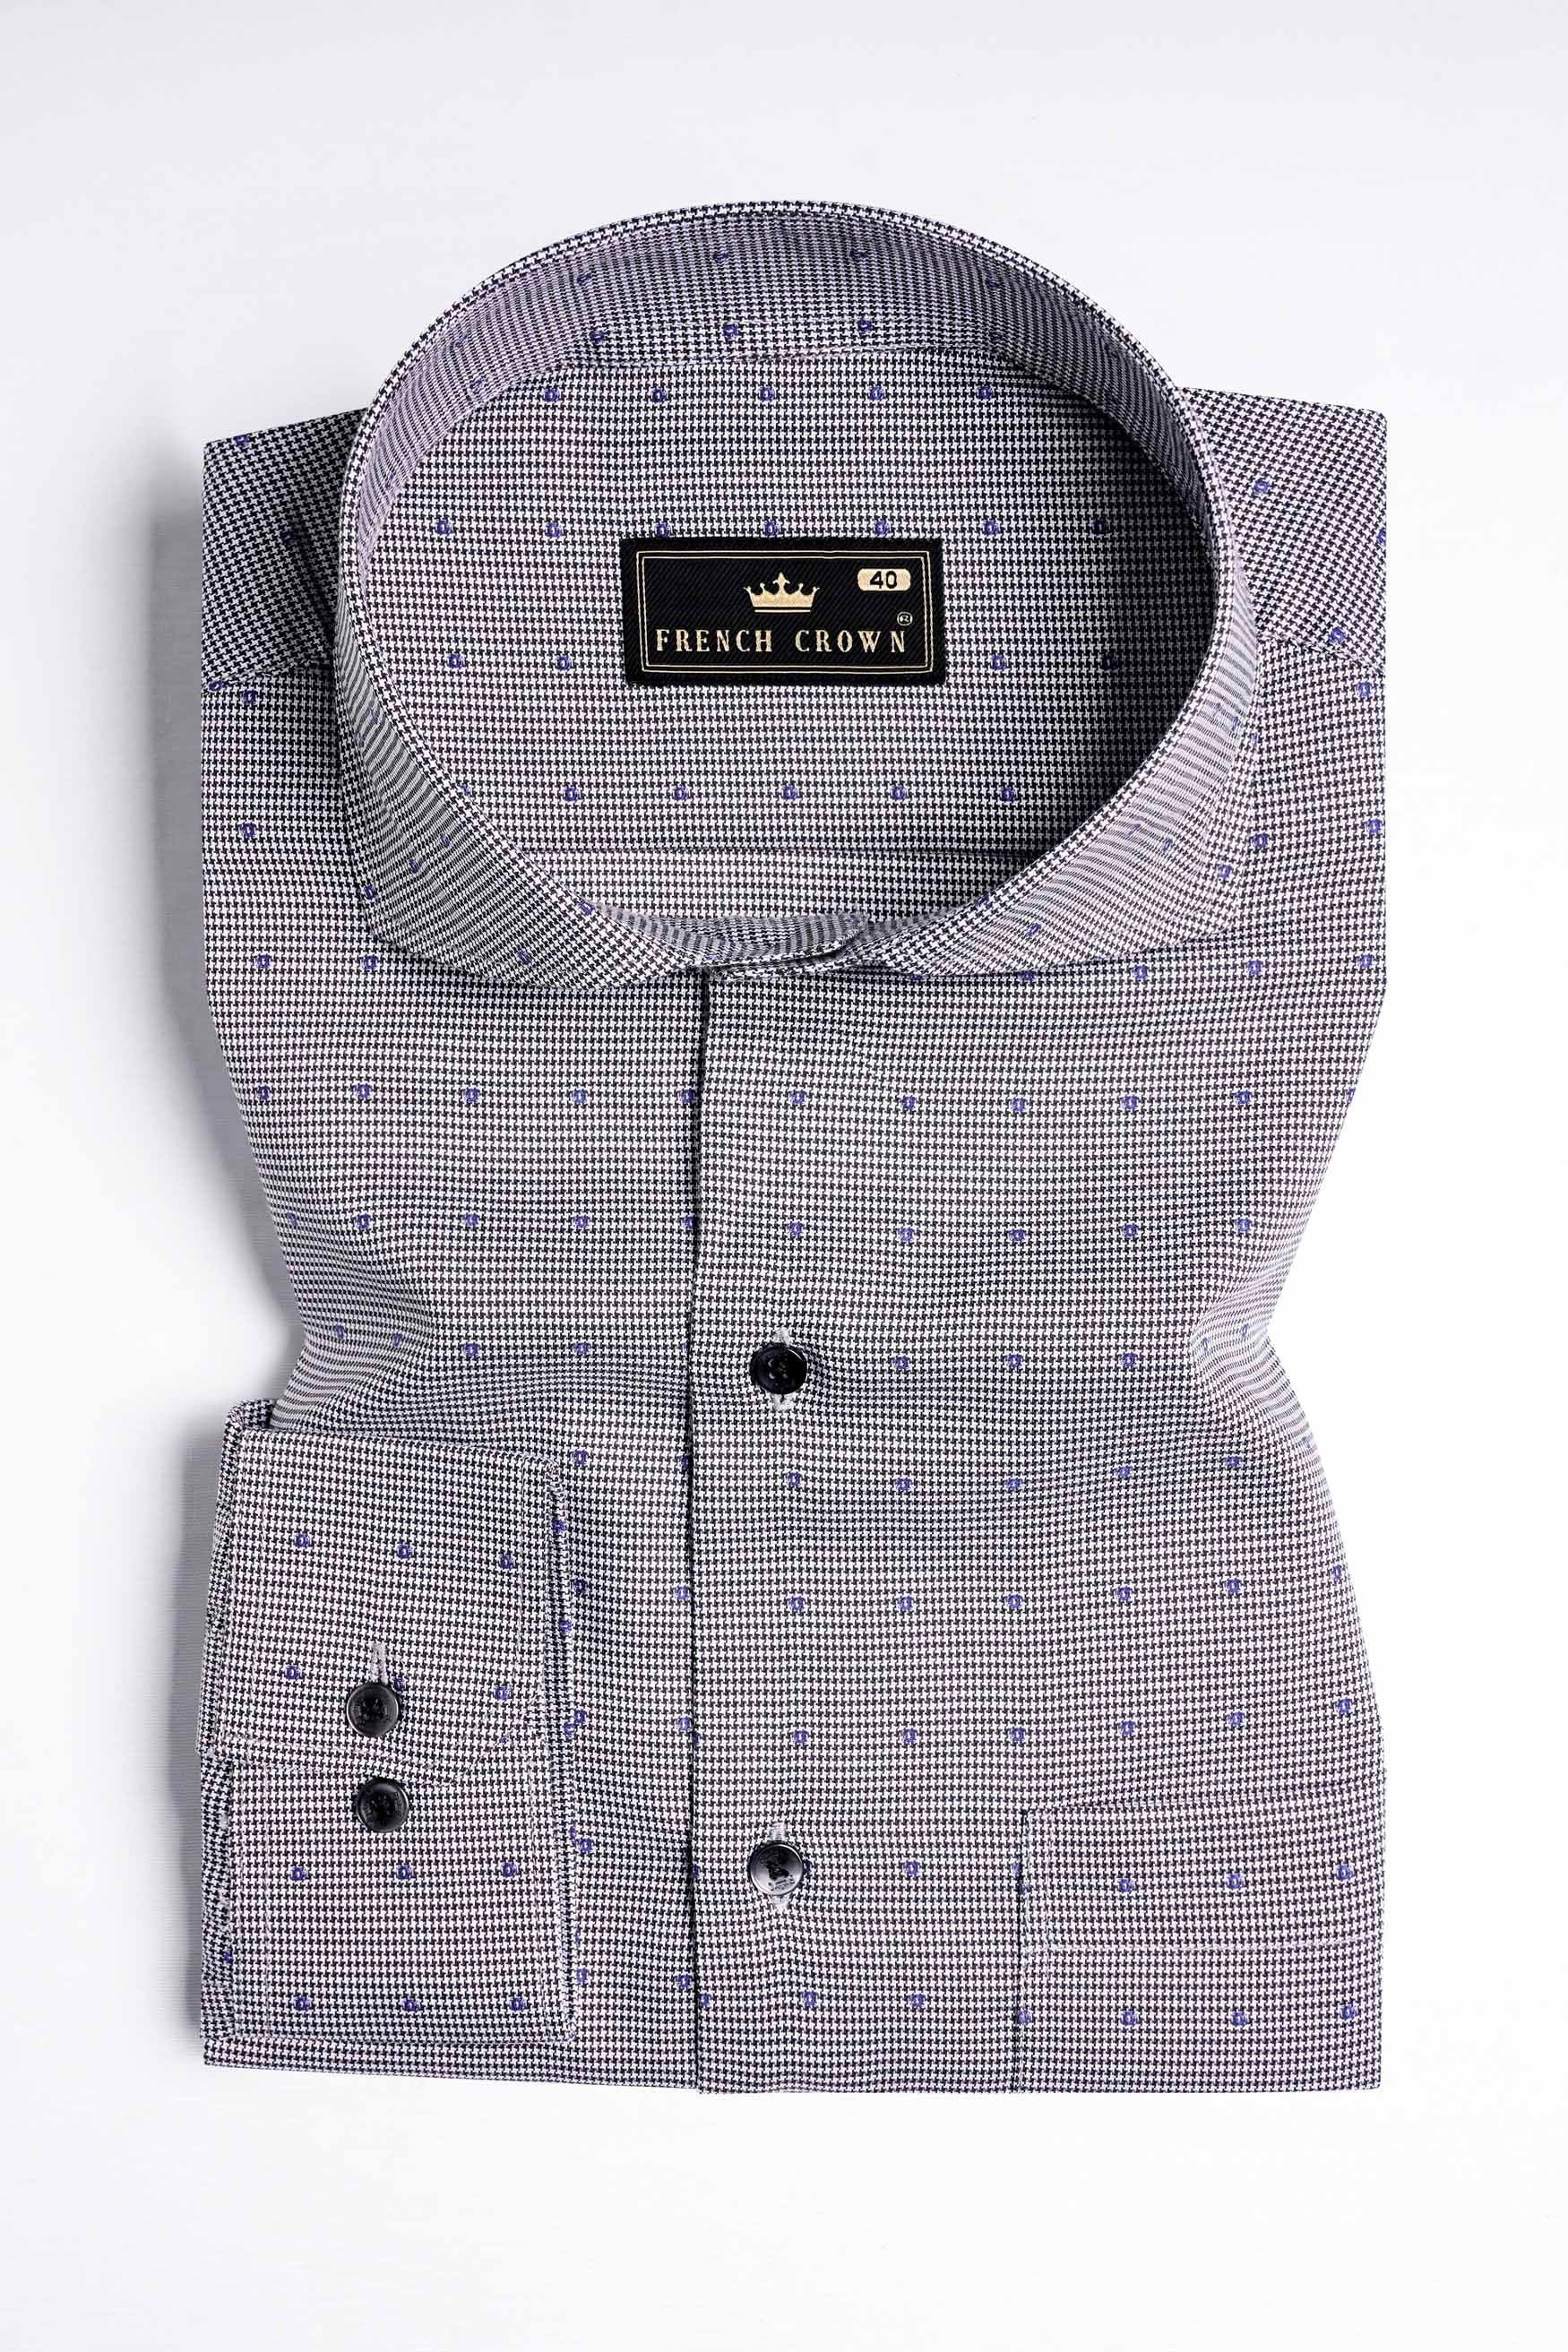 Concord Gray and Scampi Blue Houndstooth Shirt